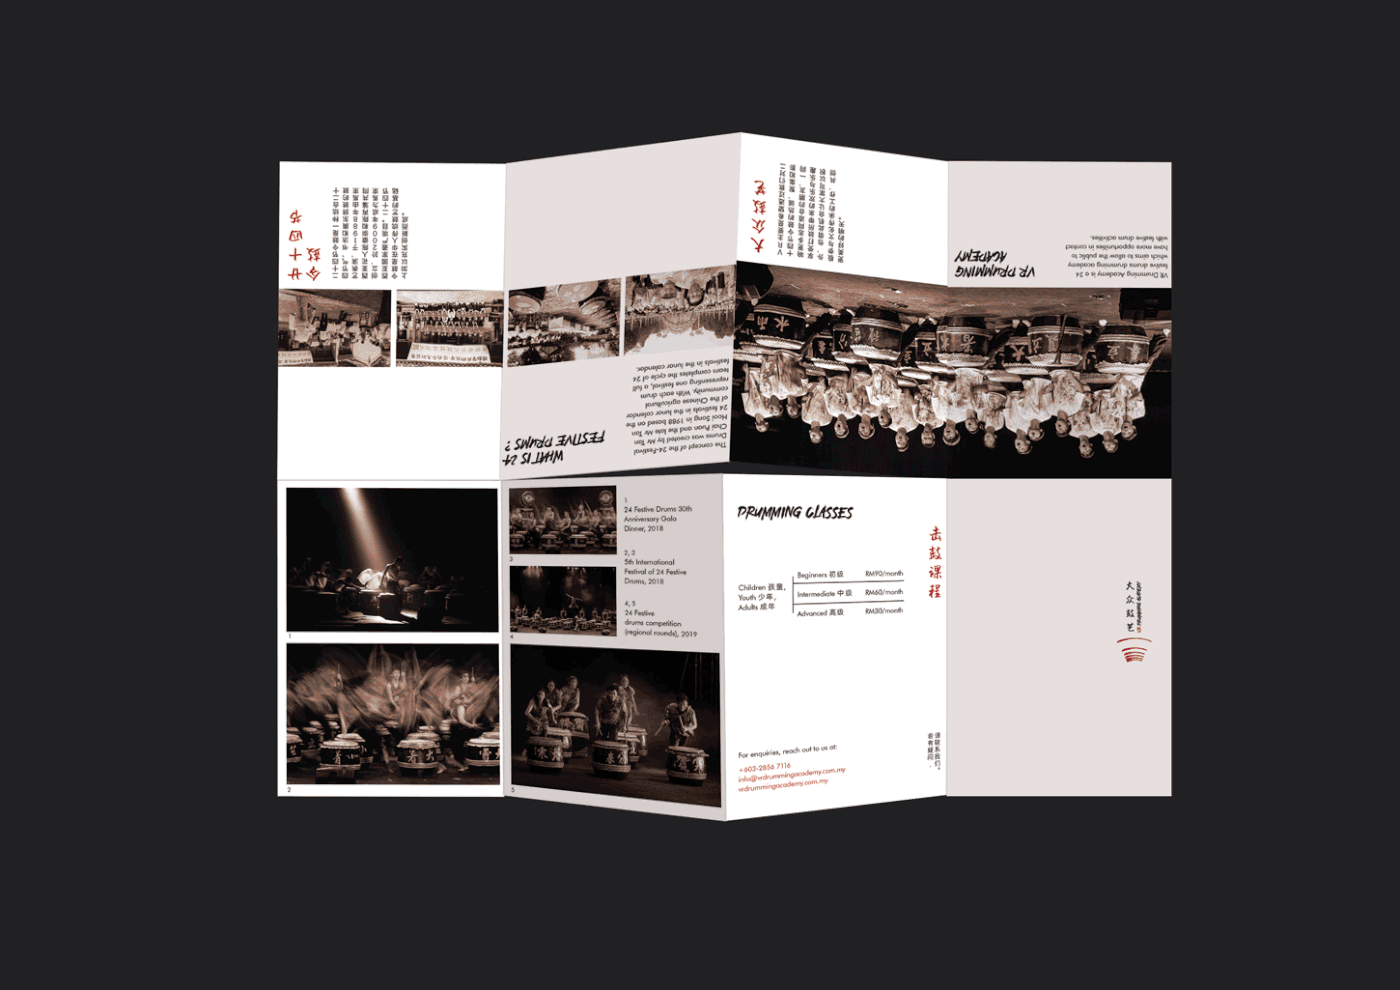 24 Festive Drums Chinese drums publication typography  